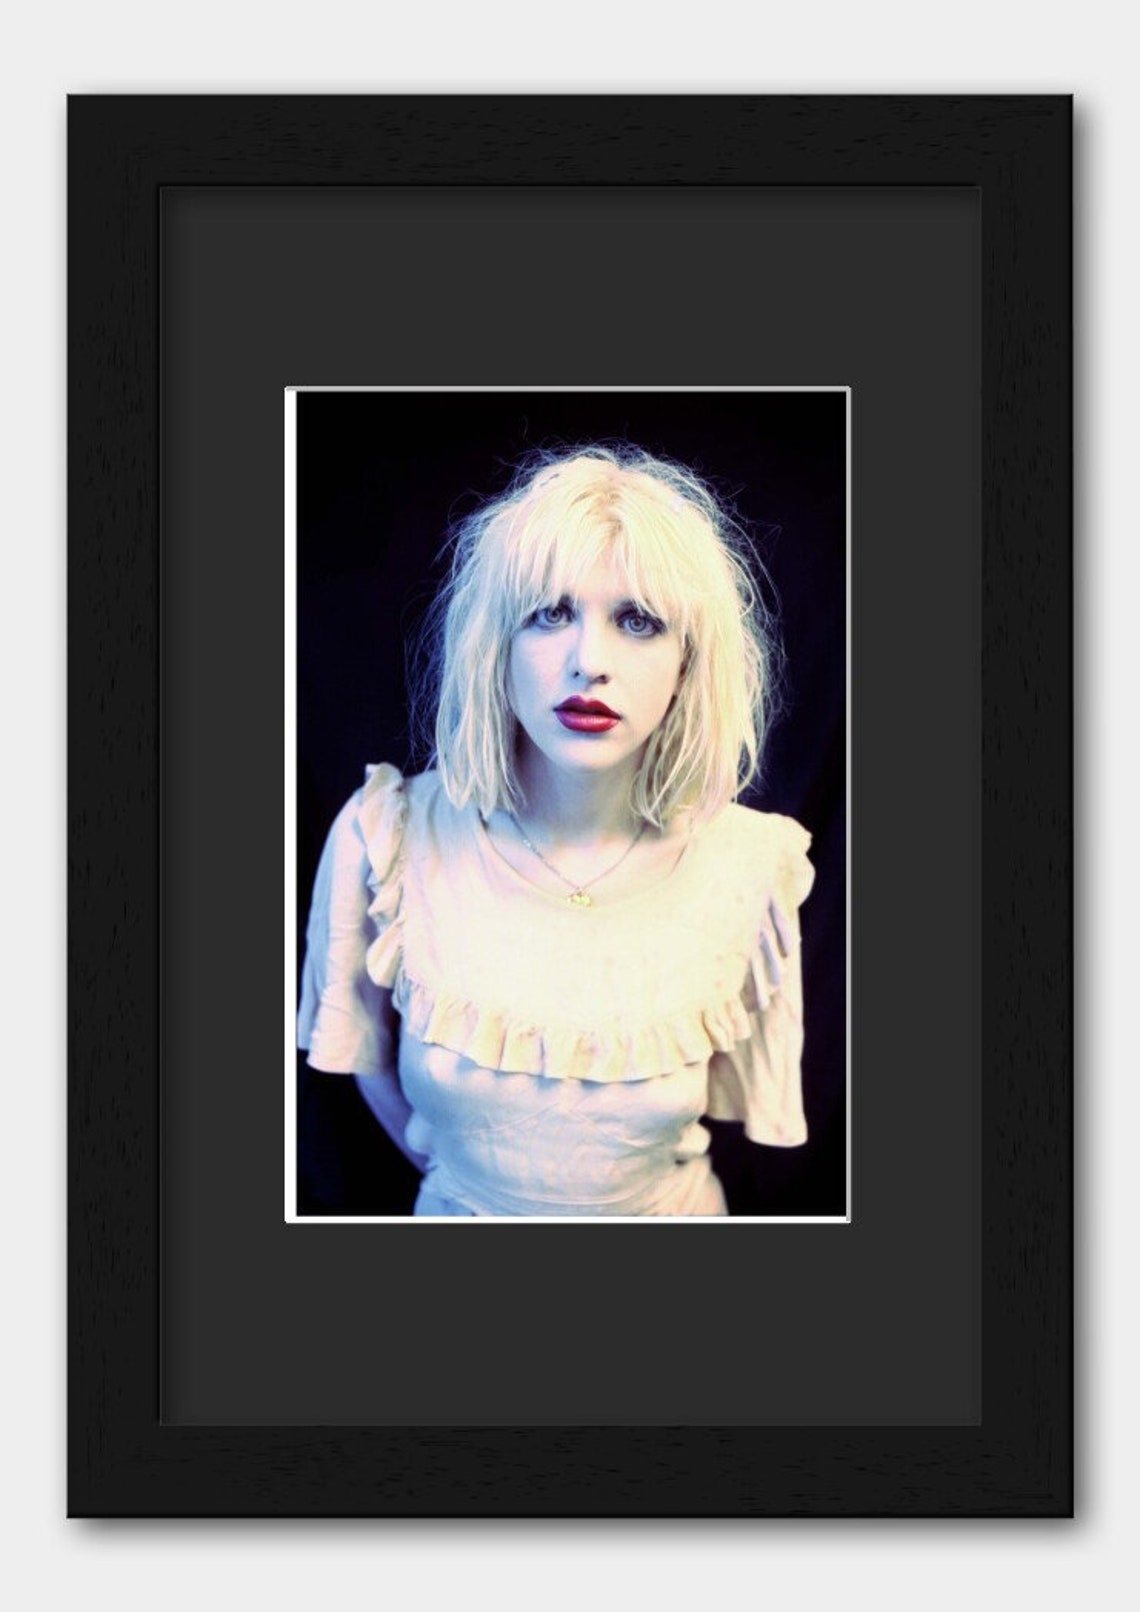 Courtney Love Hole band music poster / print portrait in | Etsy